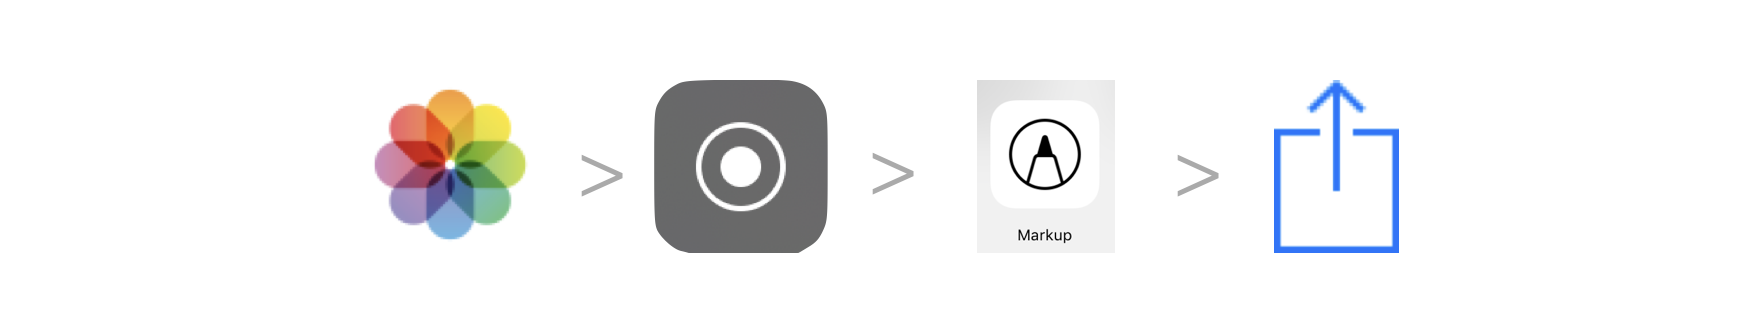 Workflow of apps and tools. Photos, screen record, markup, share